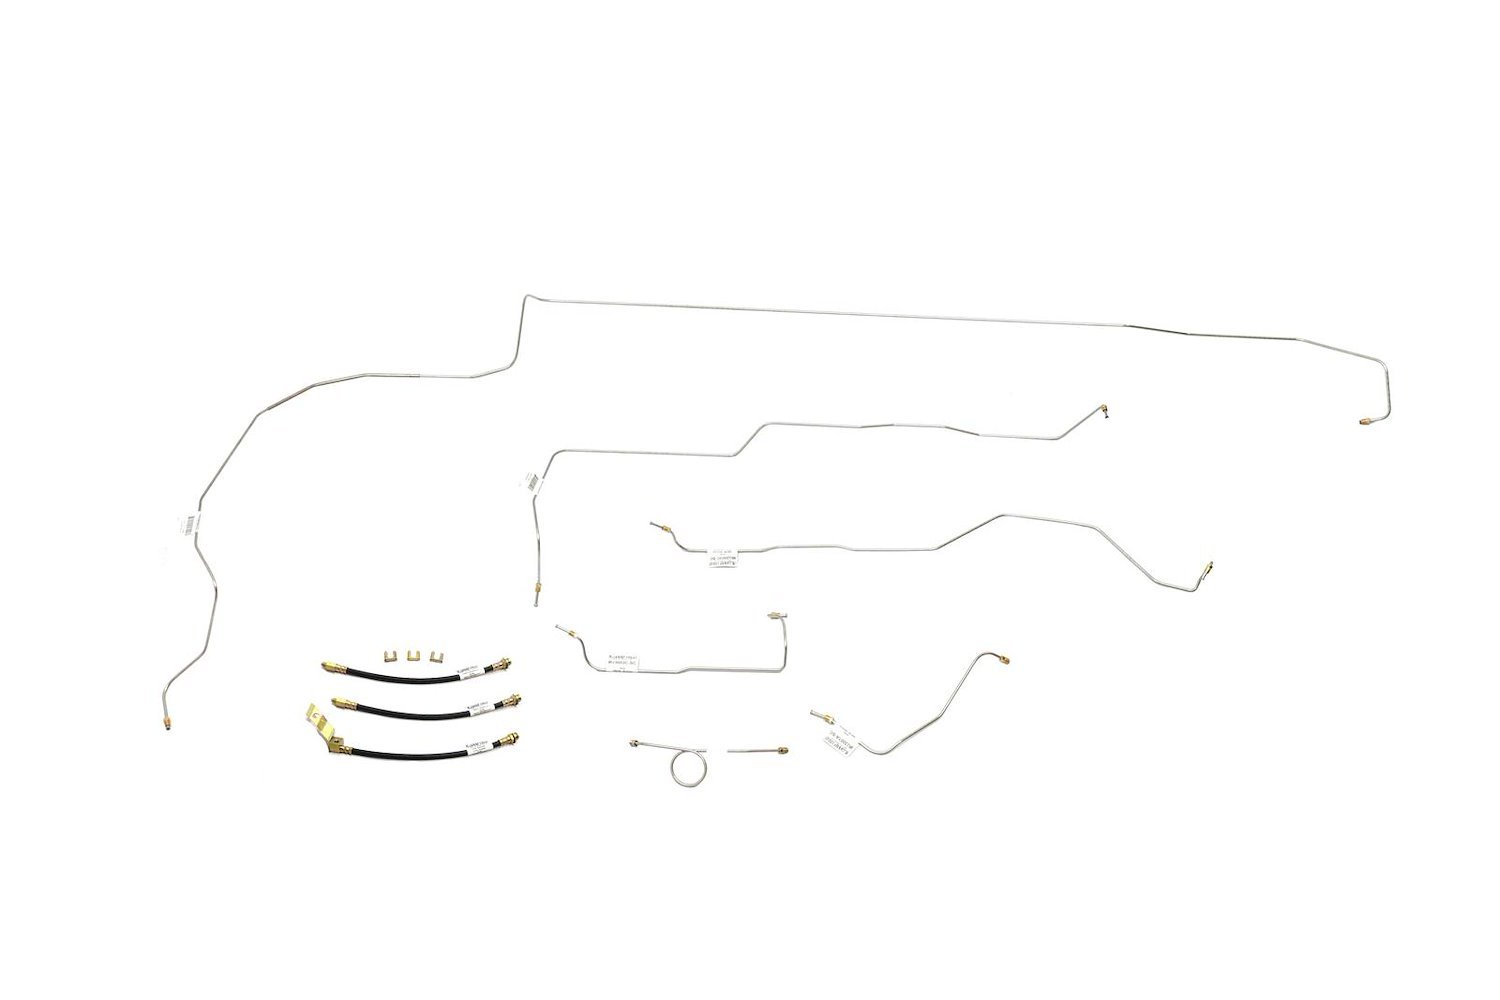 Ford Mustang Brake Line Kits 6pcs With Rubber